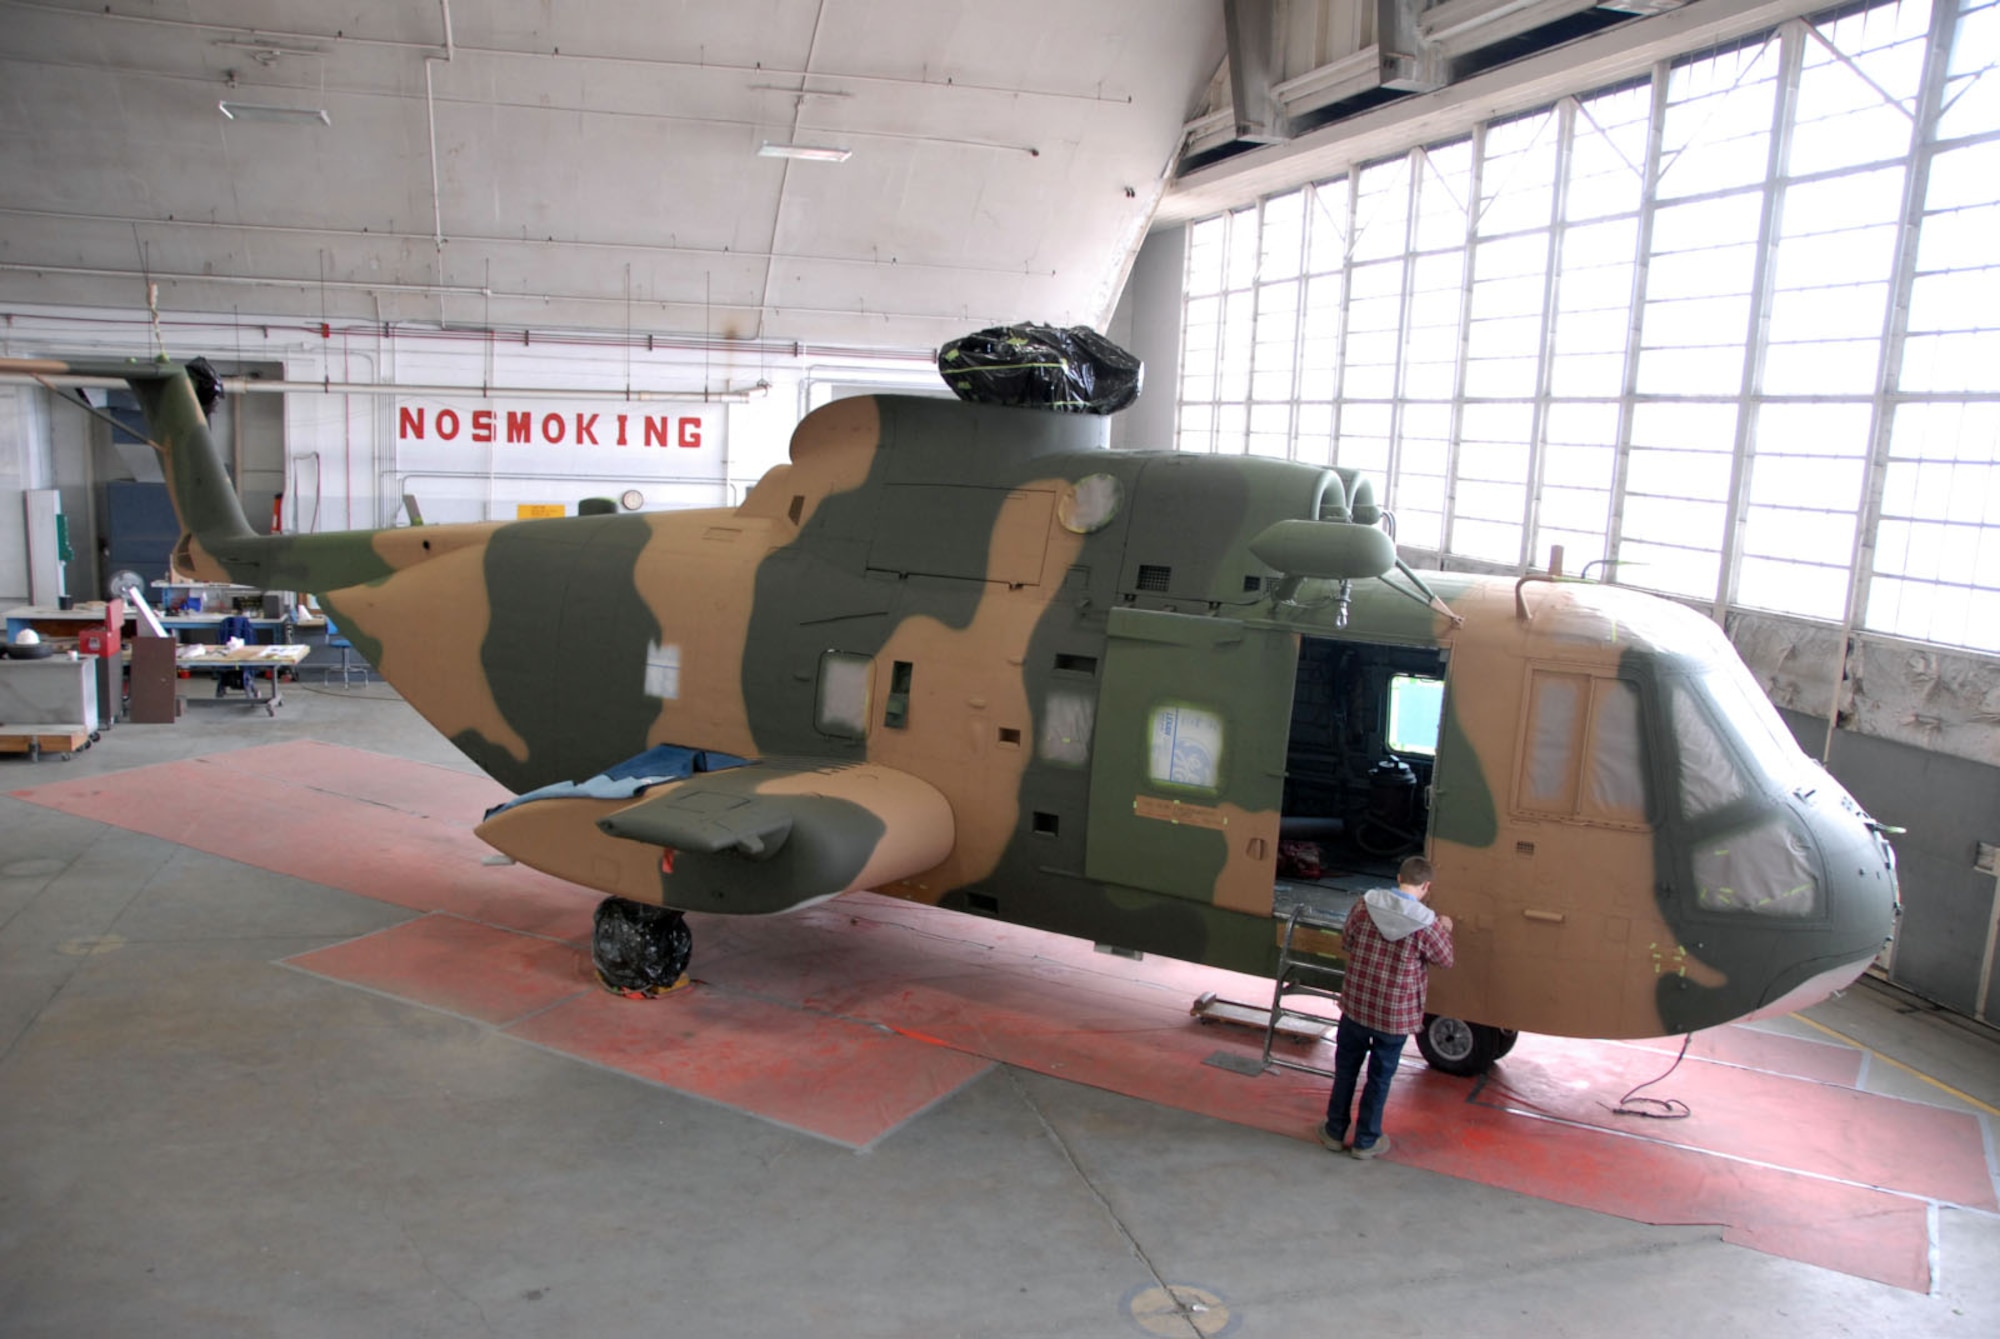 DAYTON, Ohio (11/2010) -- Sikorsky HH-3 in restoration at the National Museum of the U.S. Air Force. (U.S. Air Force photo)